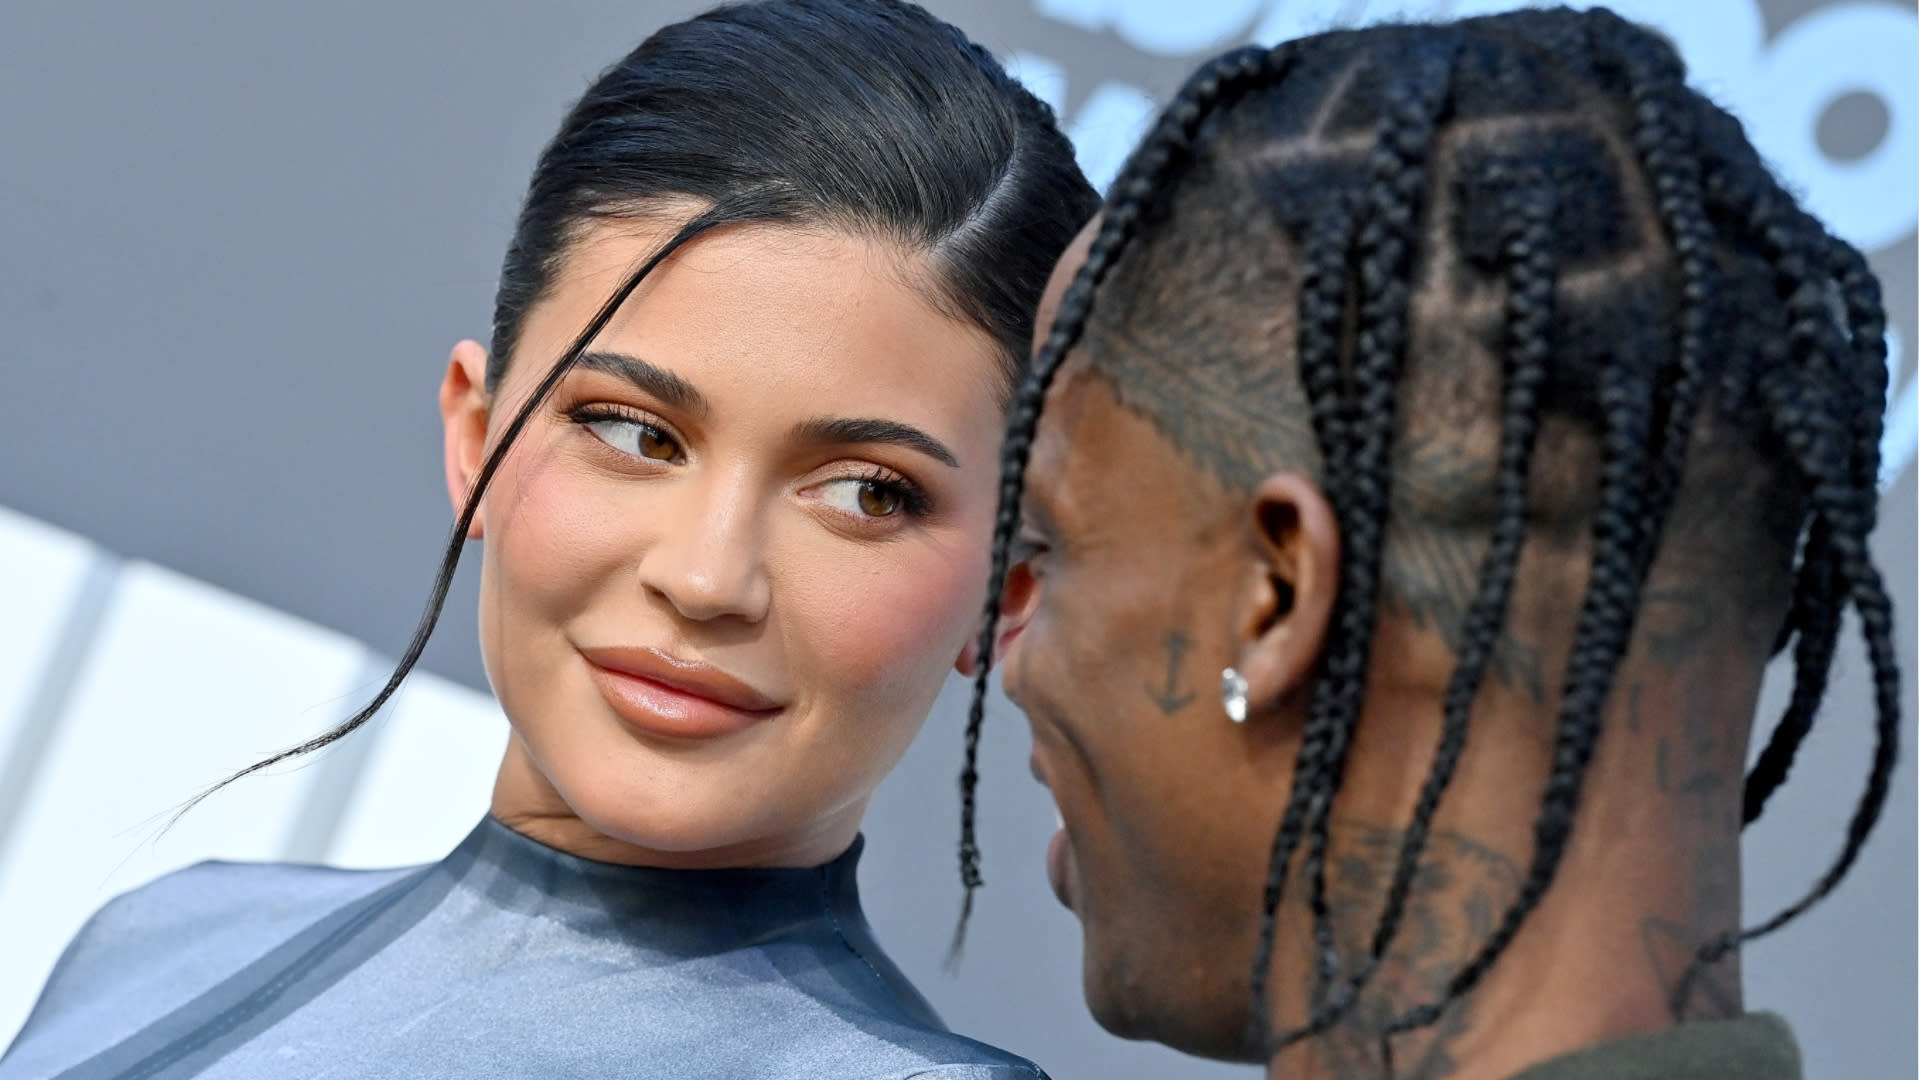 Photos from Kylie Jenner and Stormi Webster Play Dress-Up in Her Closet